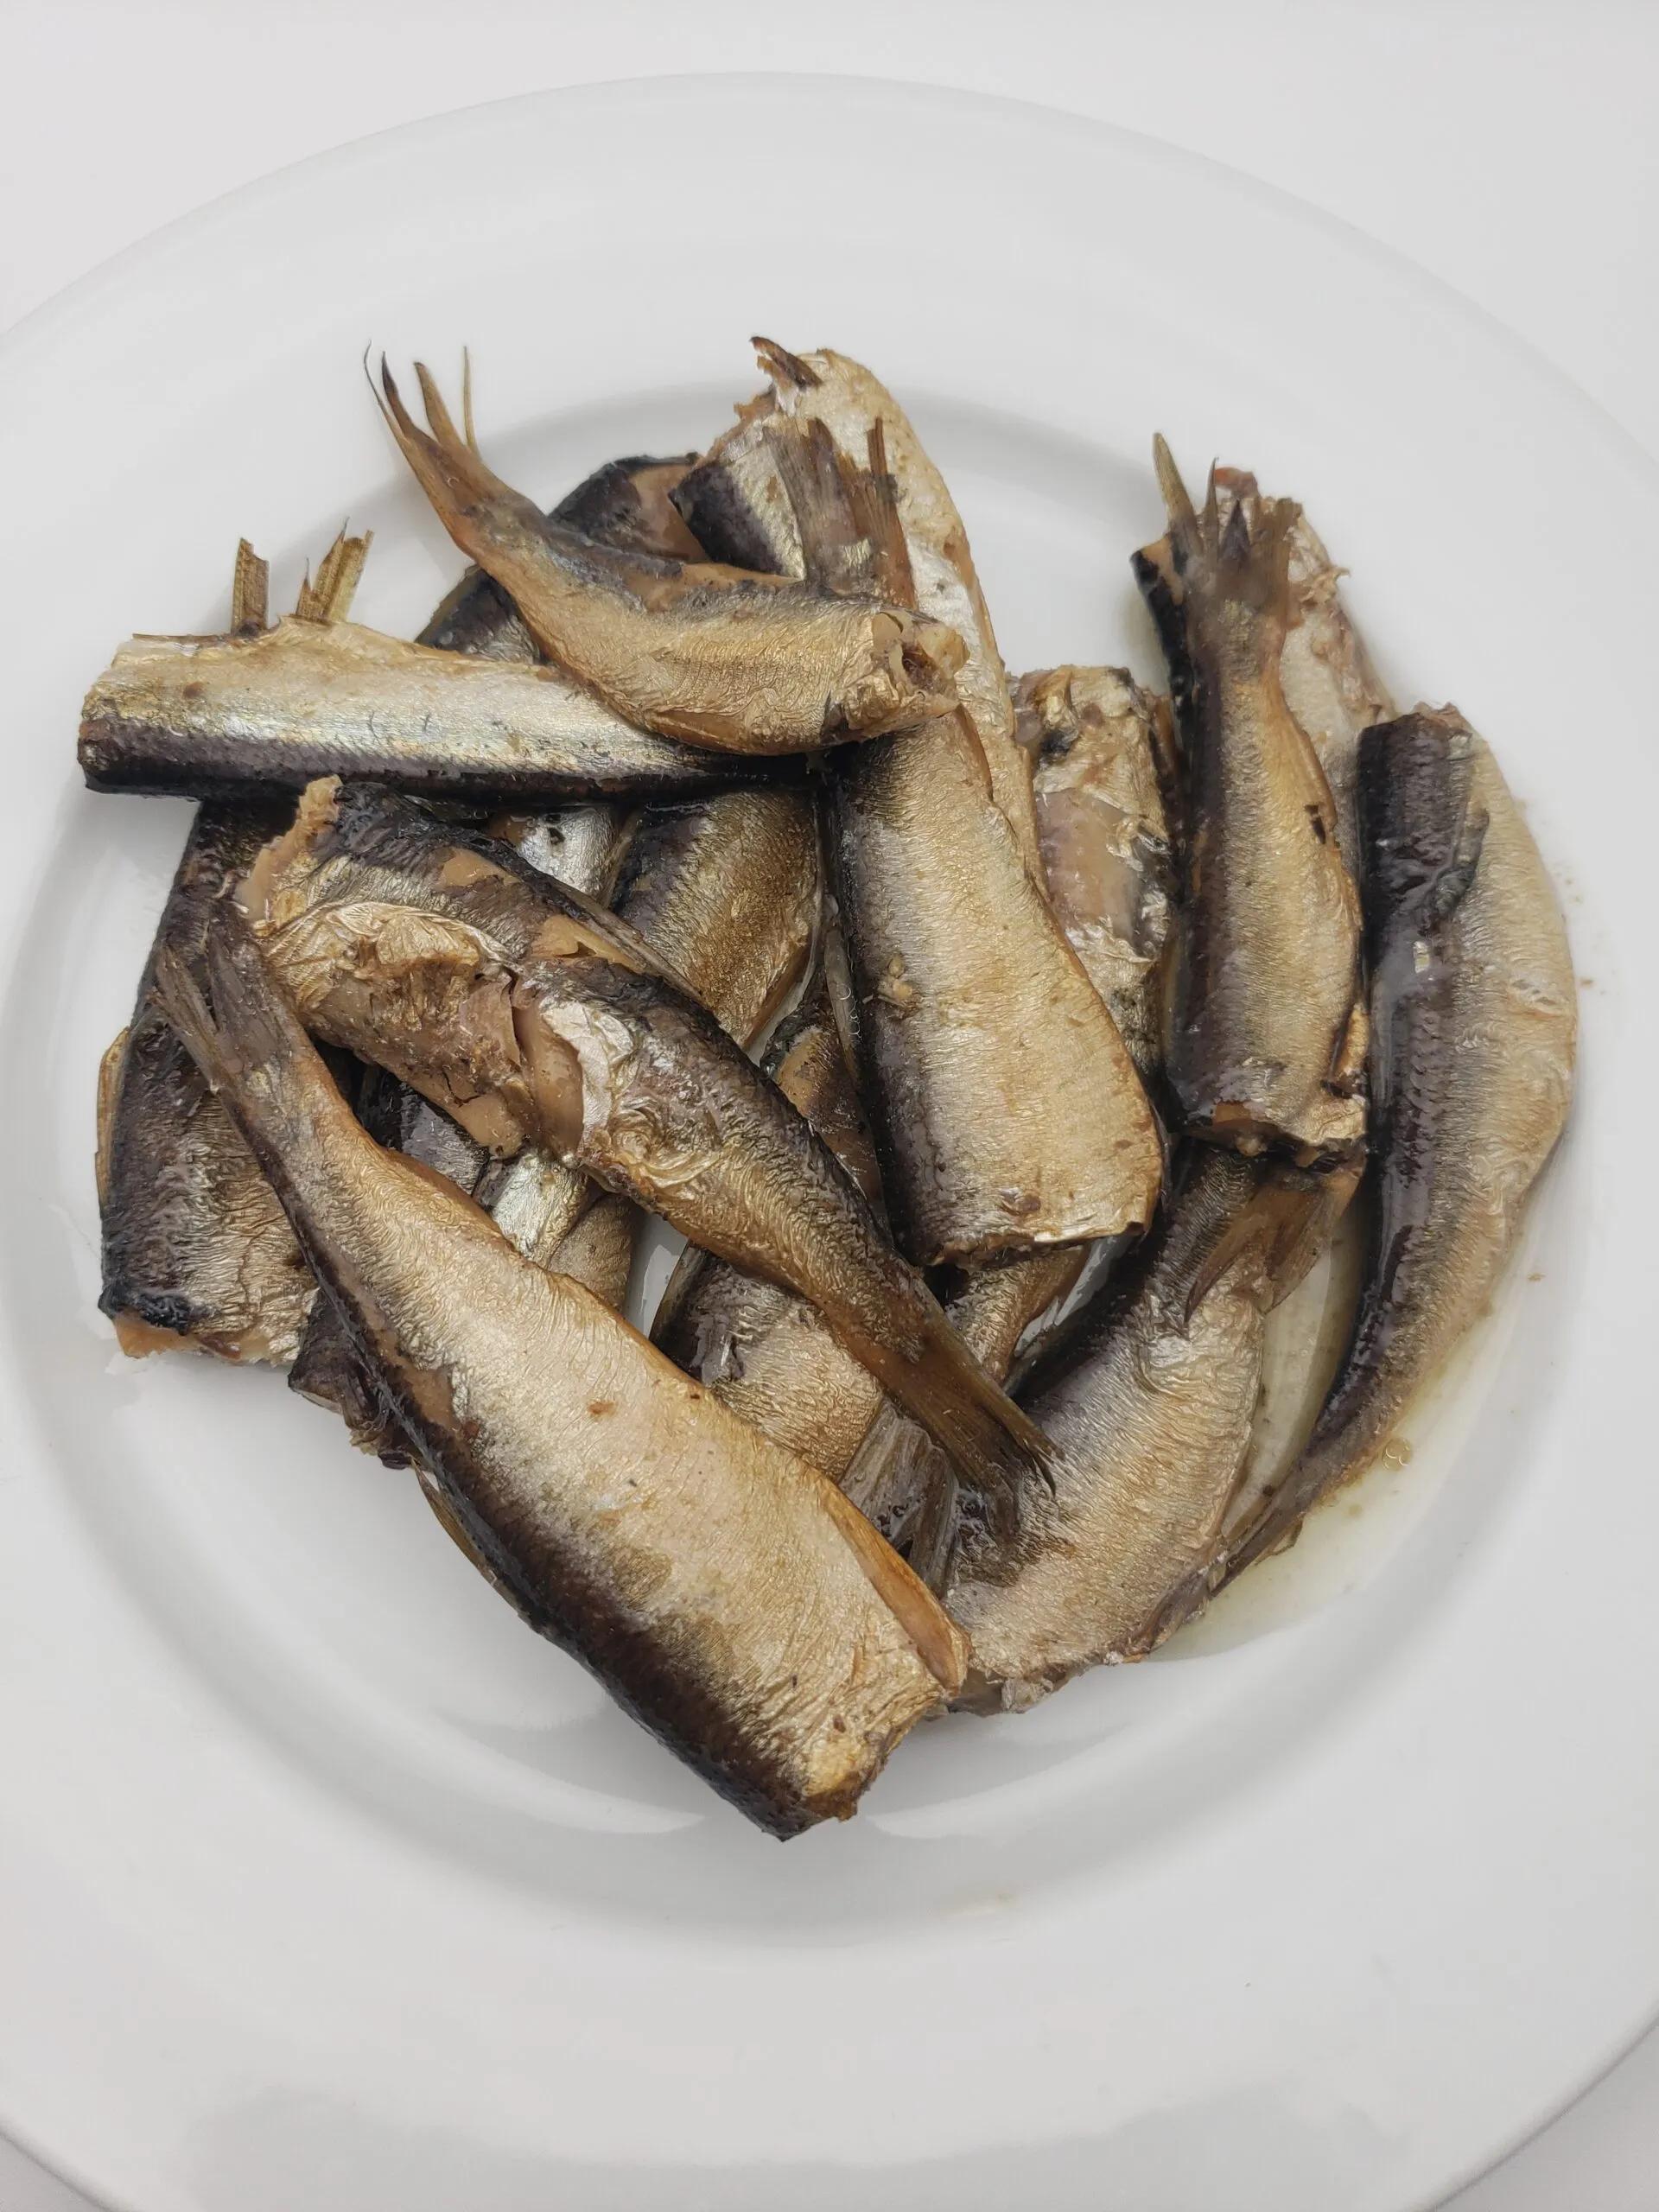 latvian smoked sprats - What kind of fish is a sprat